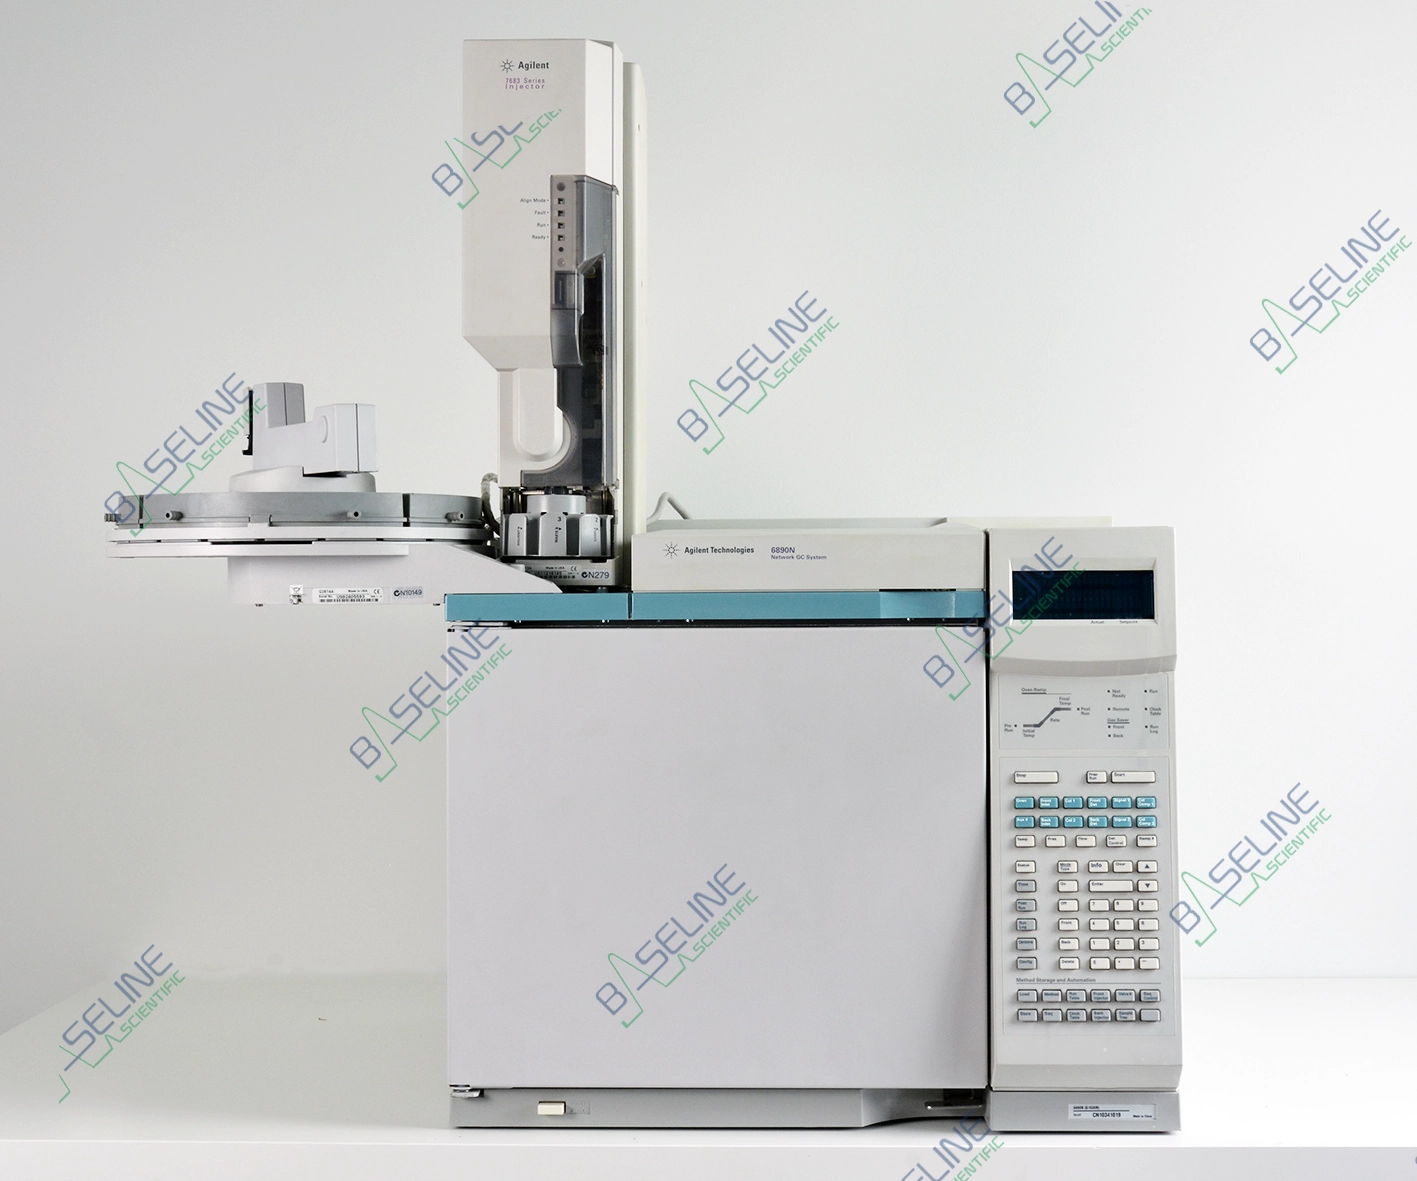 Refurbished Agilent 6890N GC with Dual SSL FID and 7683 Series Autosampler Two Injection Tower